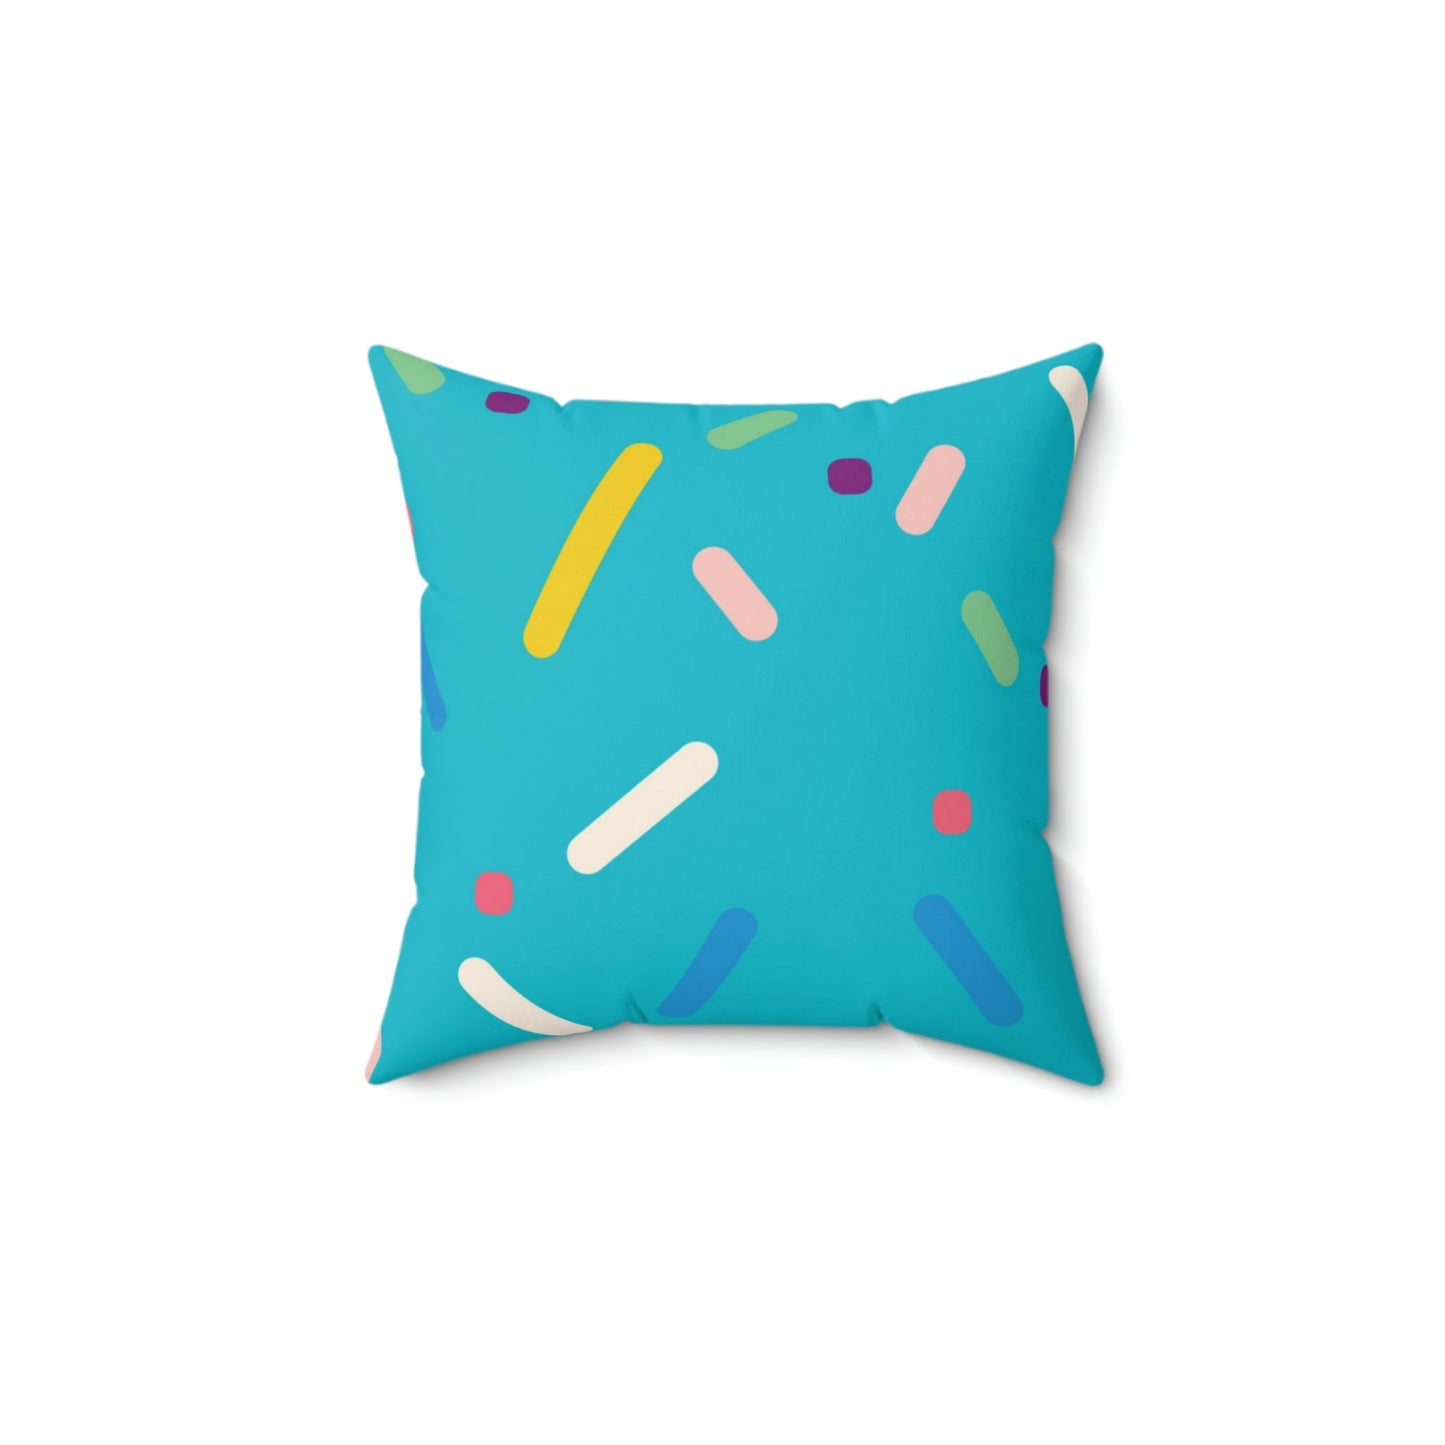 Blue Birthday Cake Square Pillow Home Decor Pink Sweetheart